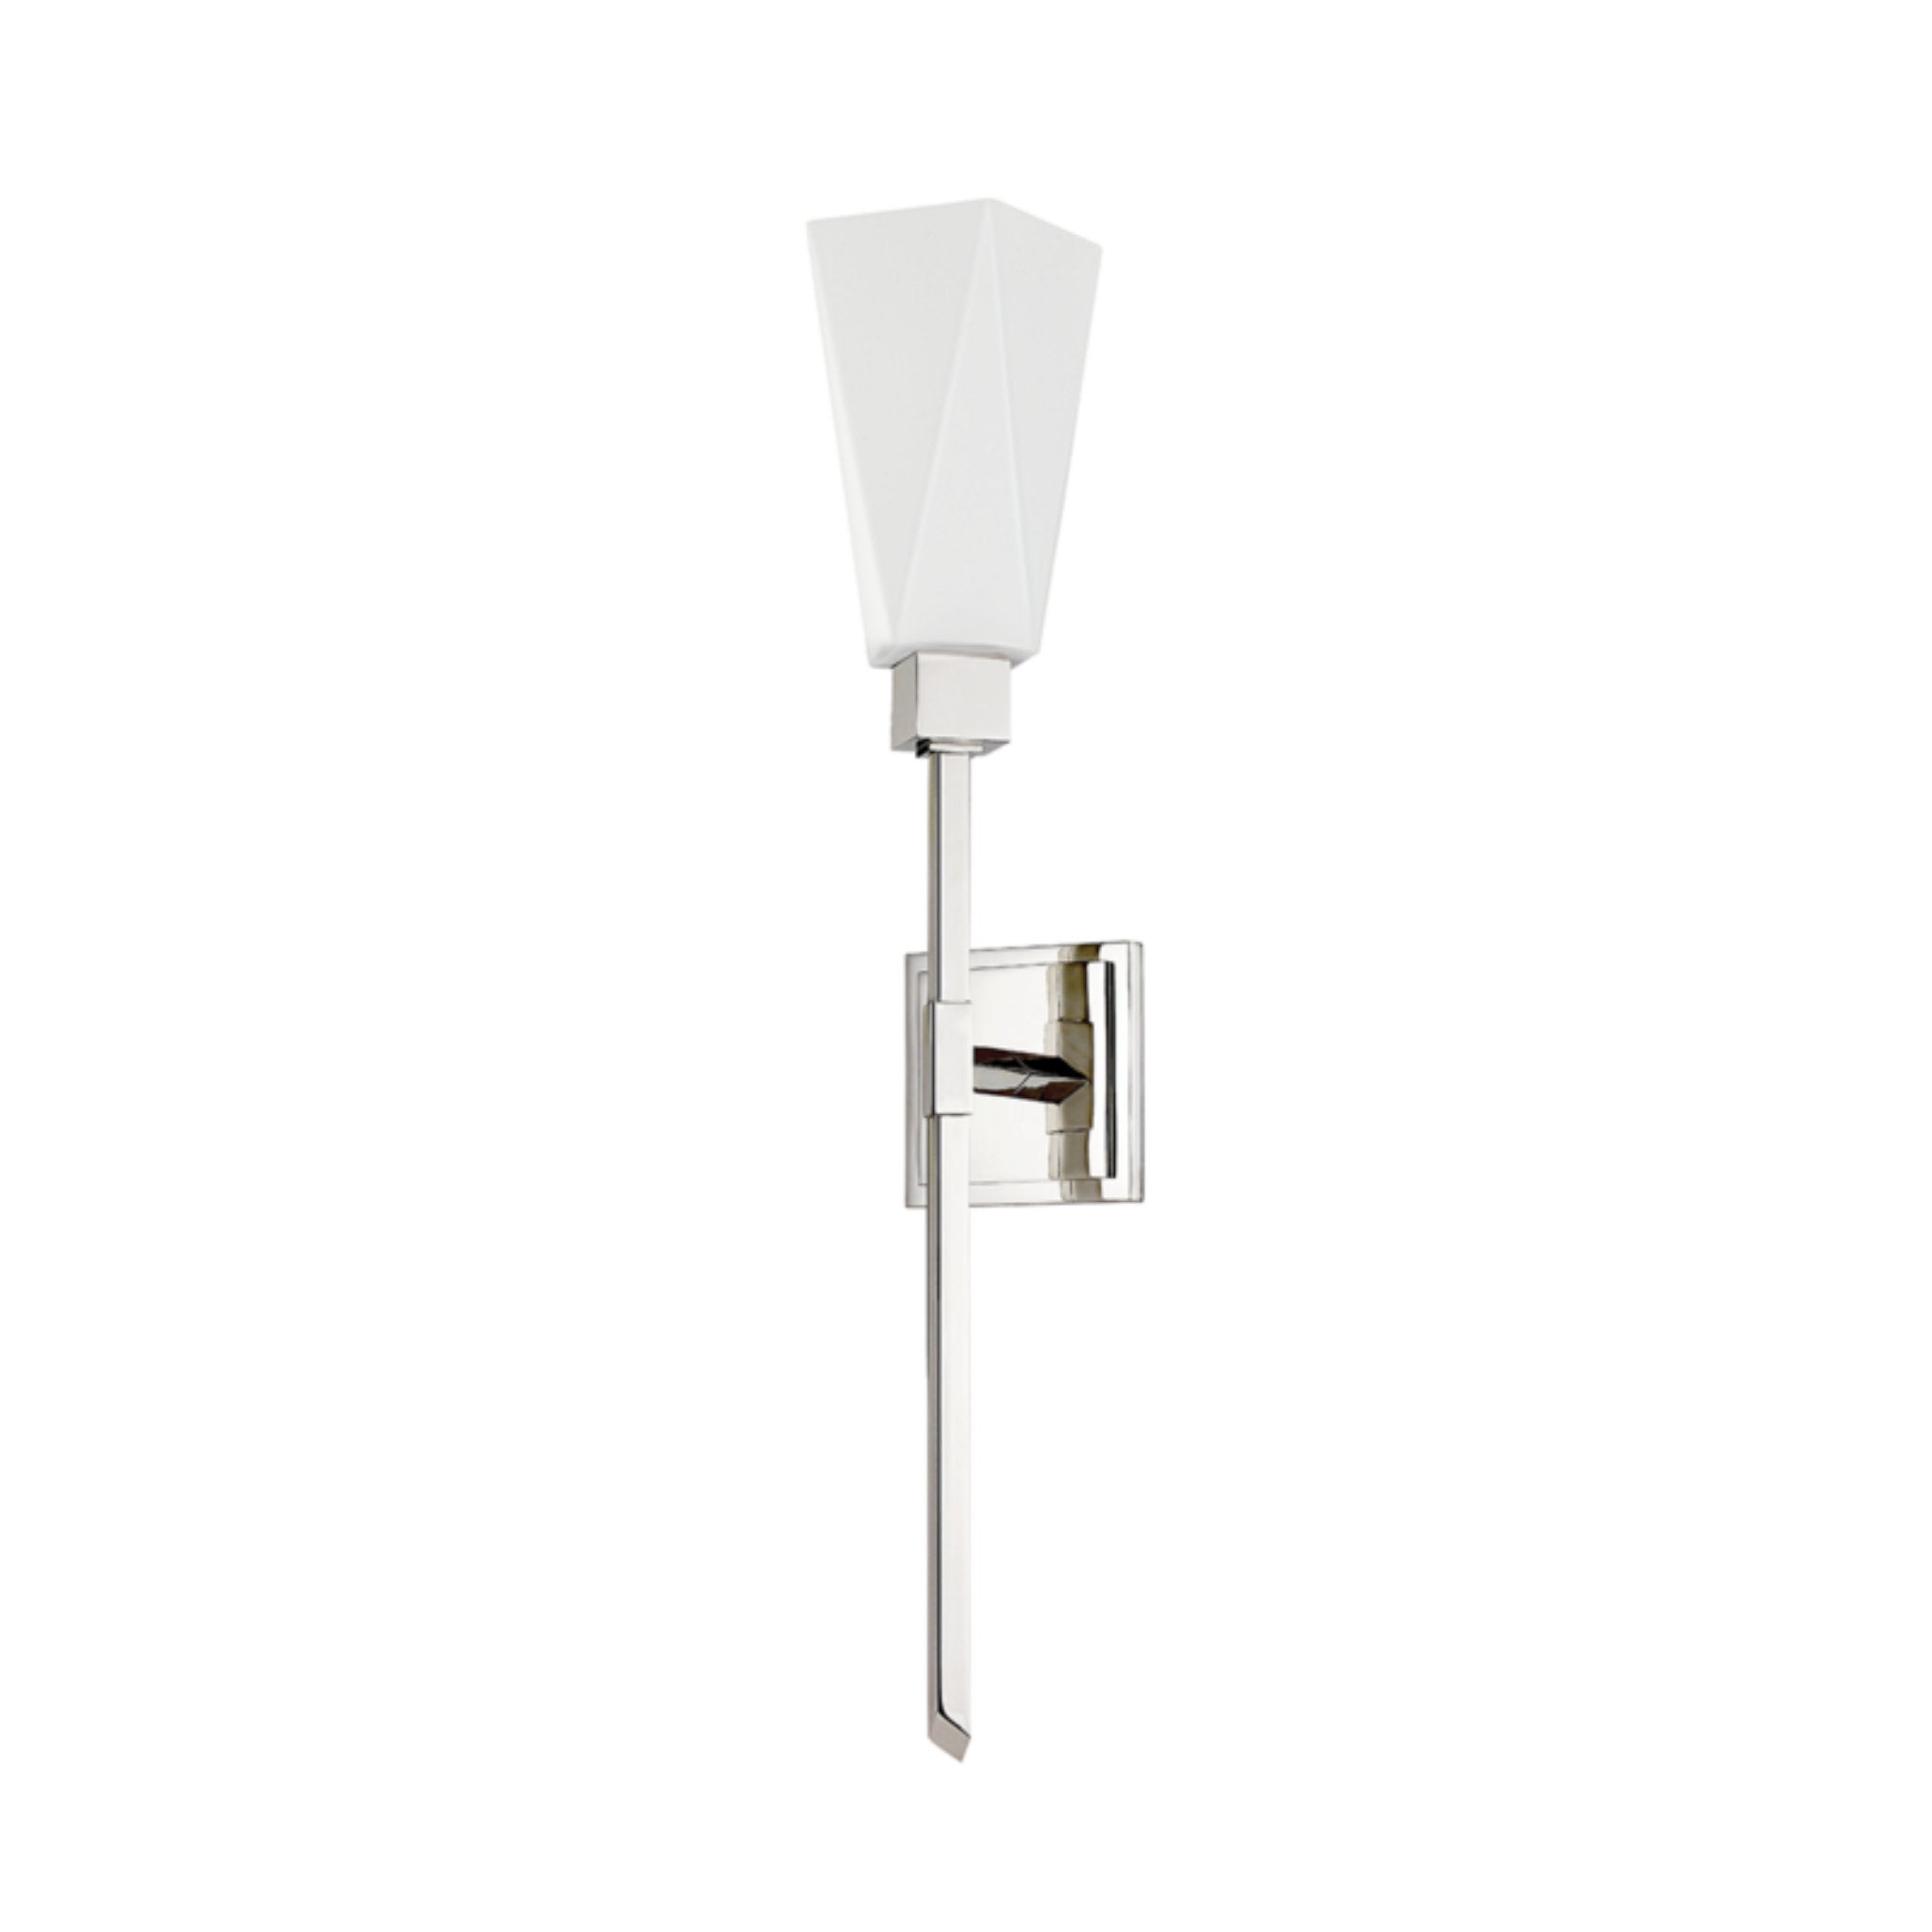 Artemis 1 Light Wall Sconce in Polished Nickel